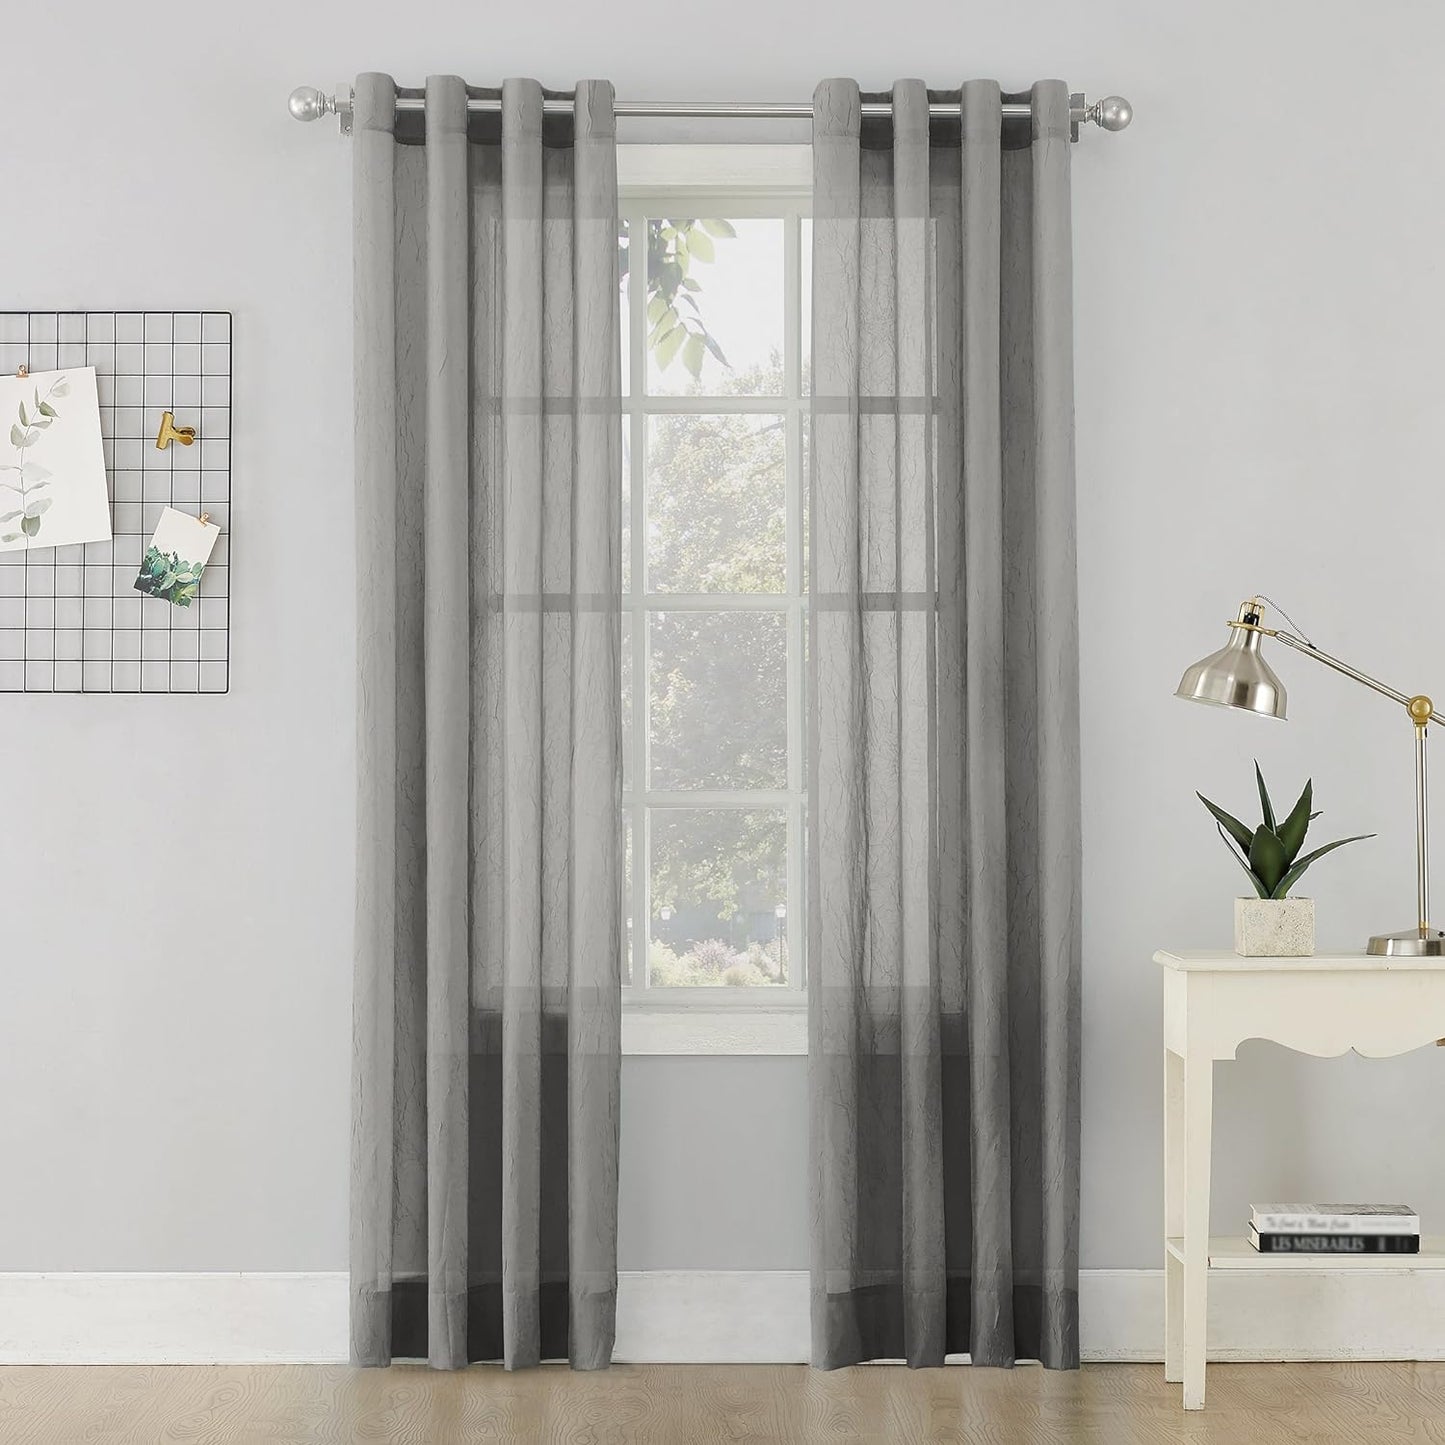 No. 918 Erica Crushed Sheer Voile Grommet Curtain Panel 84.00" X 51.00"  No. 918 Charcoal Gray 51" X 63" Panel 